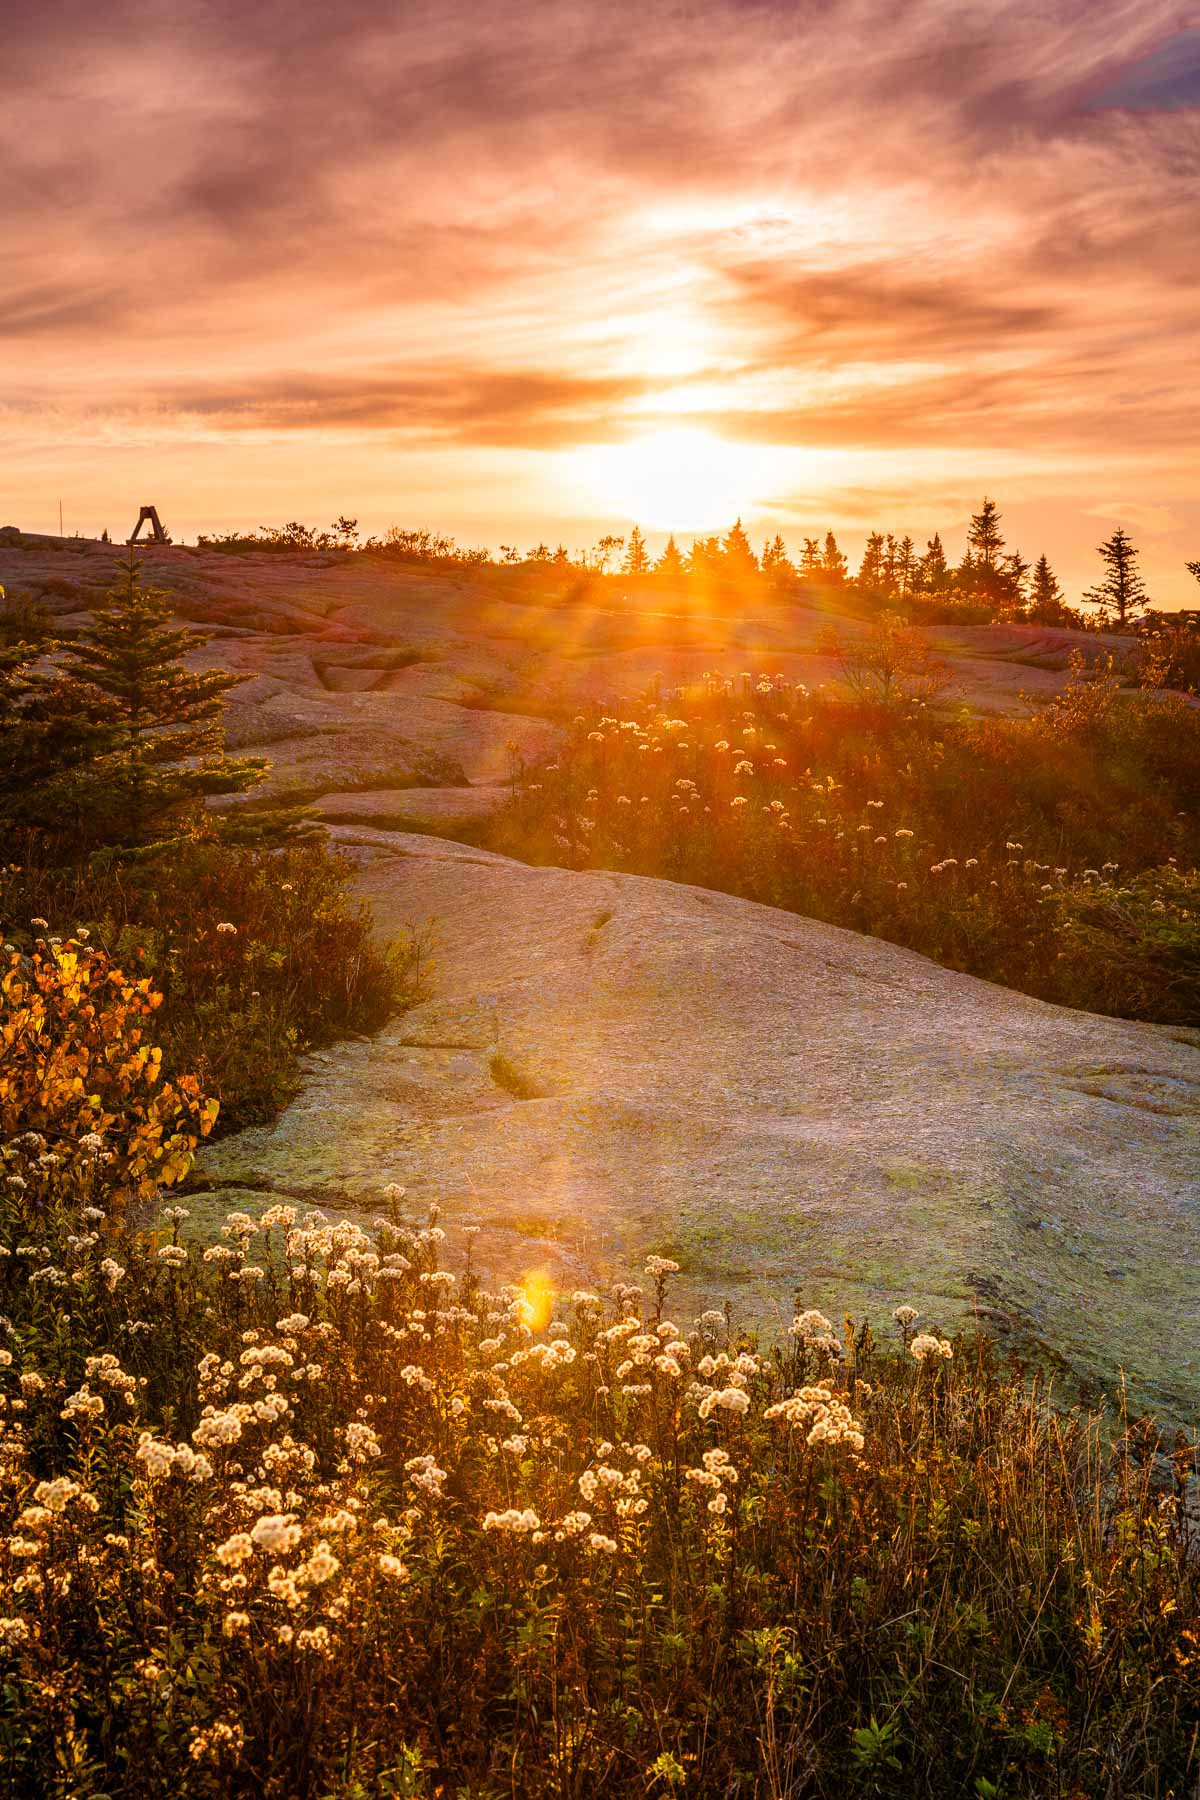 Sunset from Cadillac Mountain in Acadia National Park